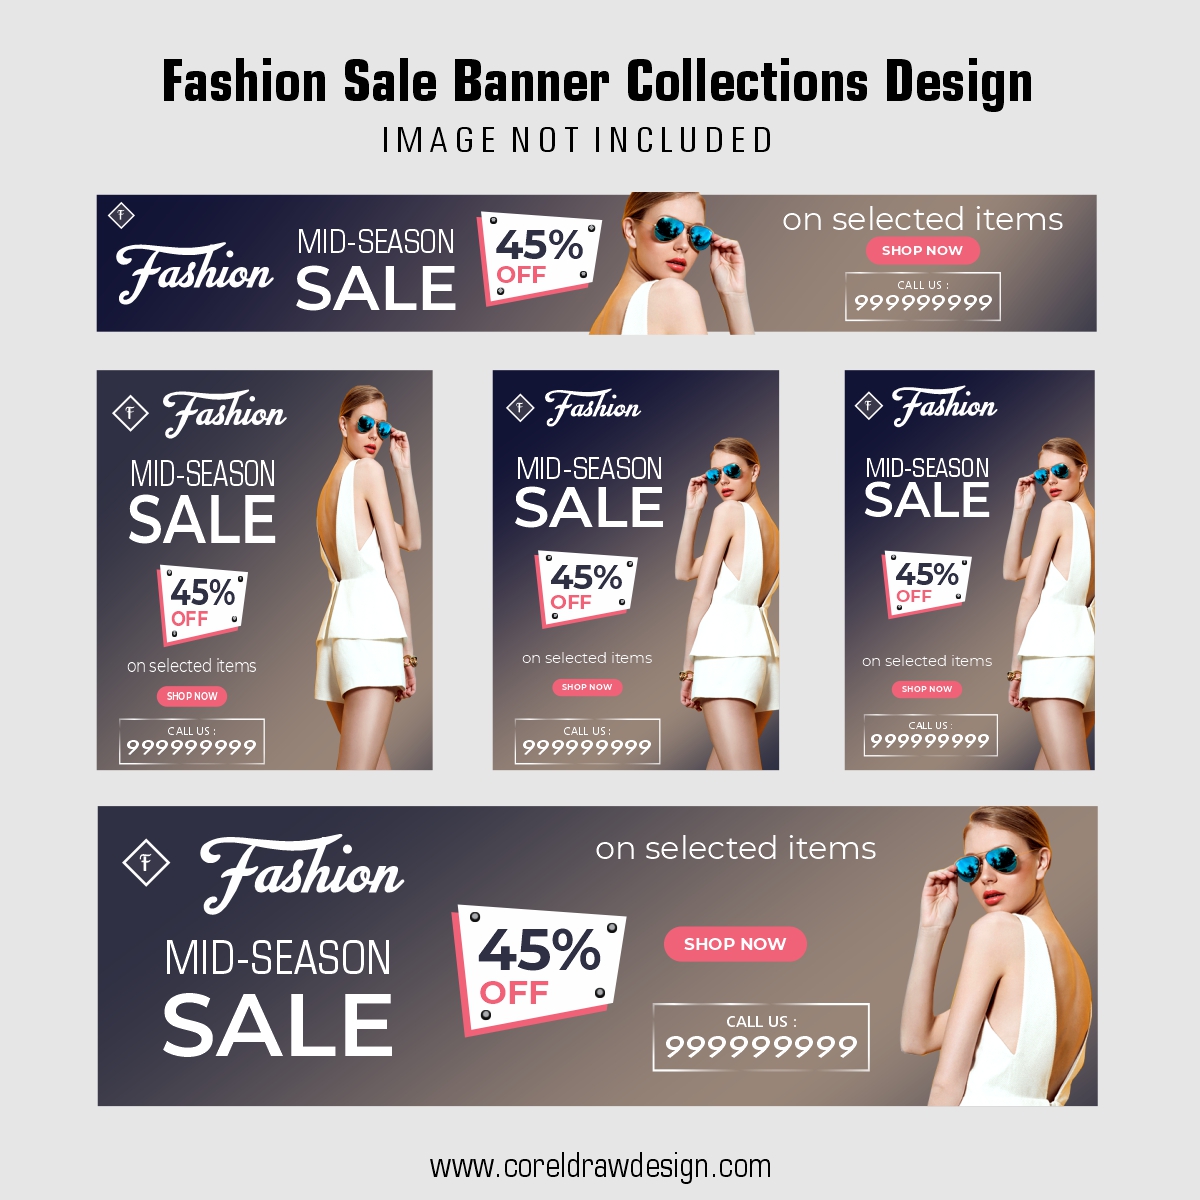 Fashion Sale Banner Collections Design